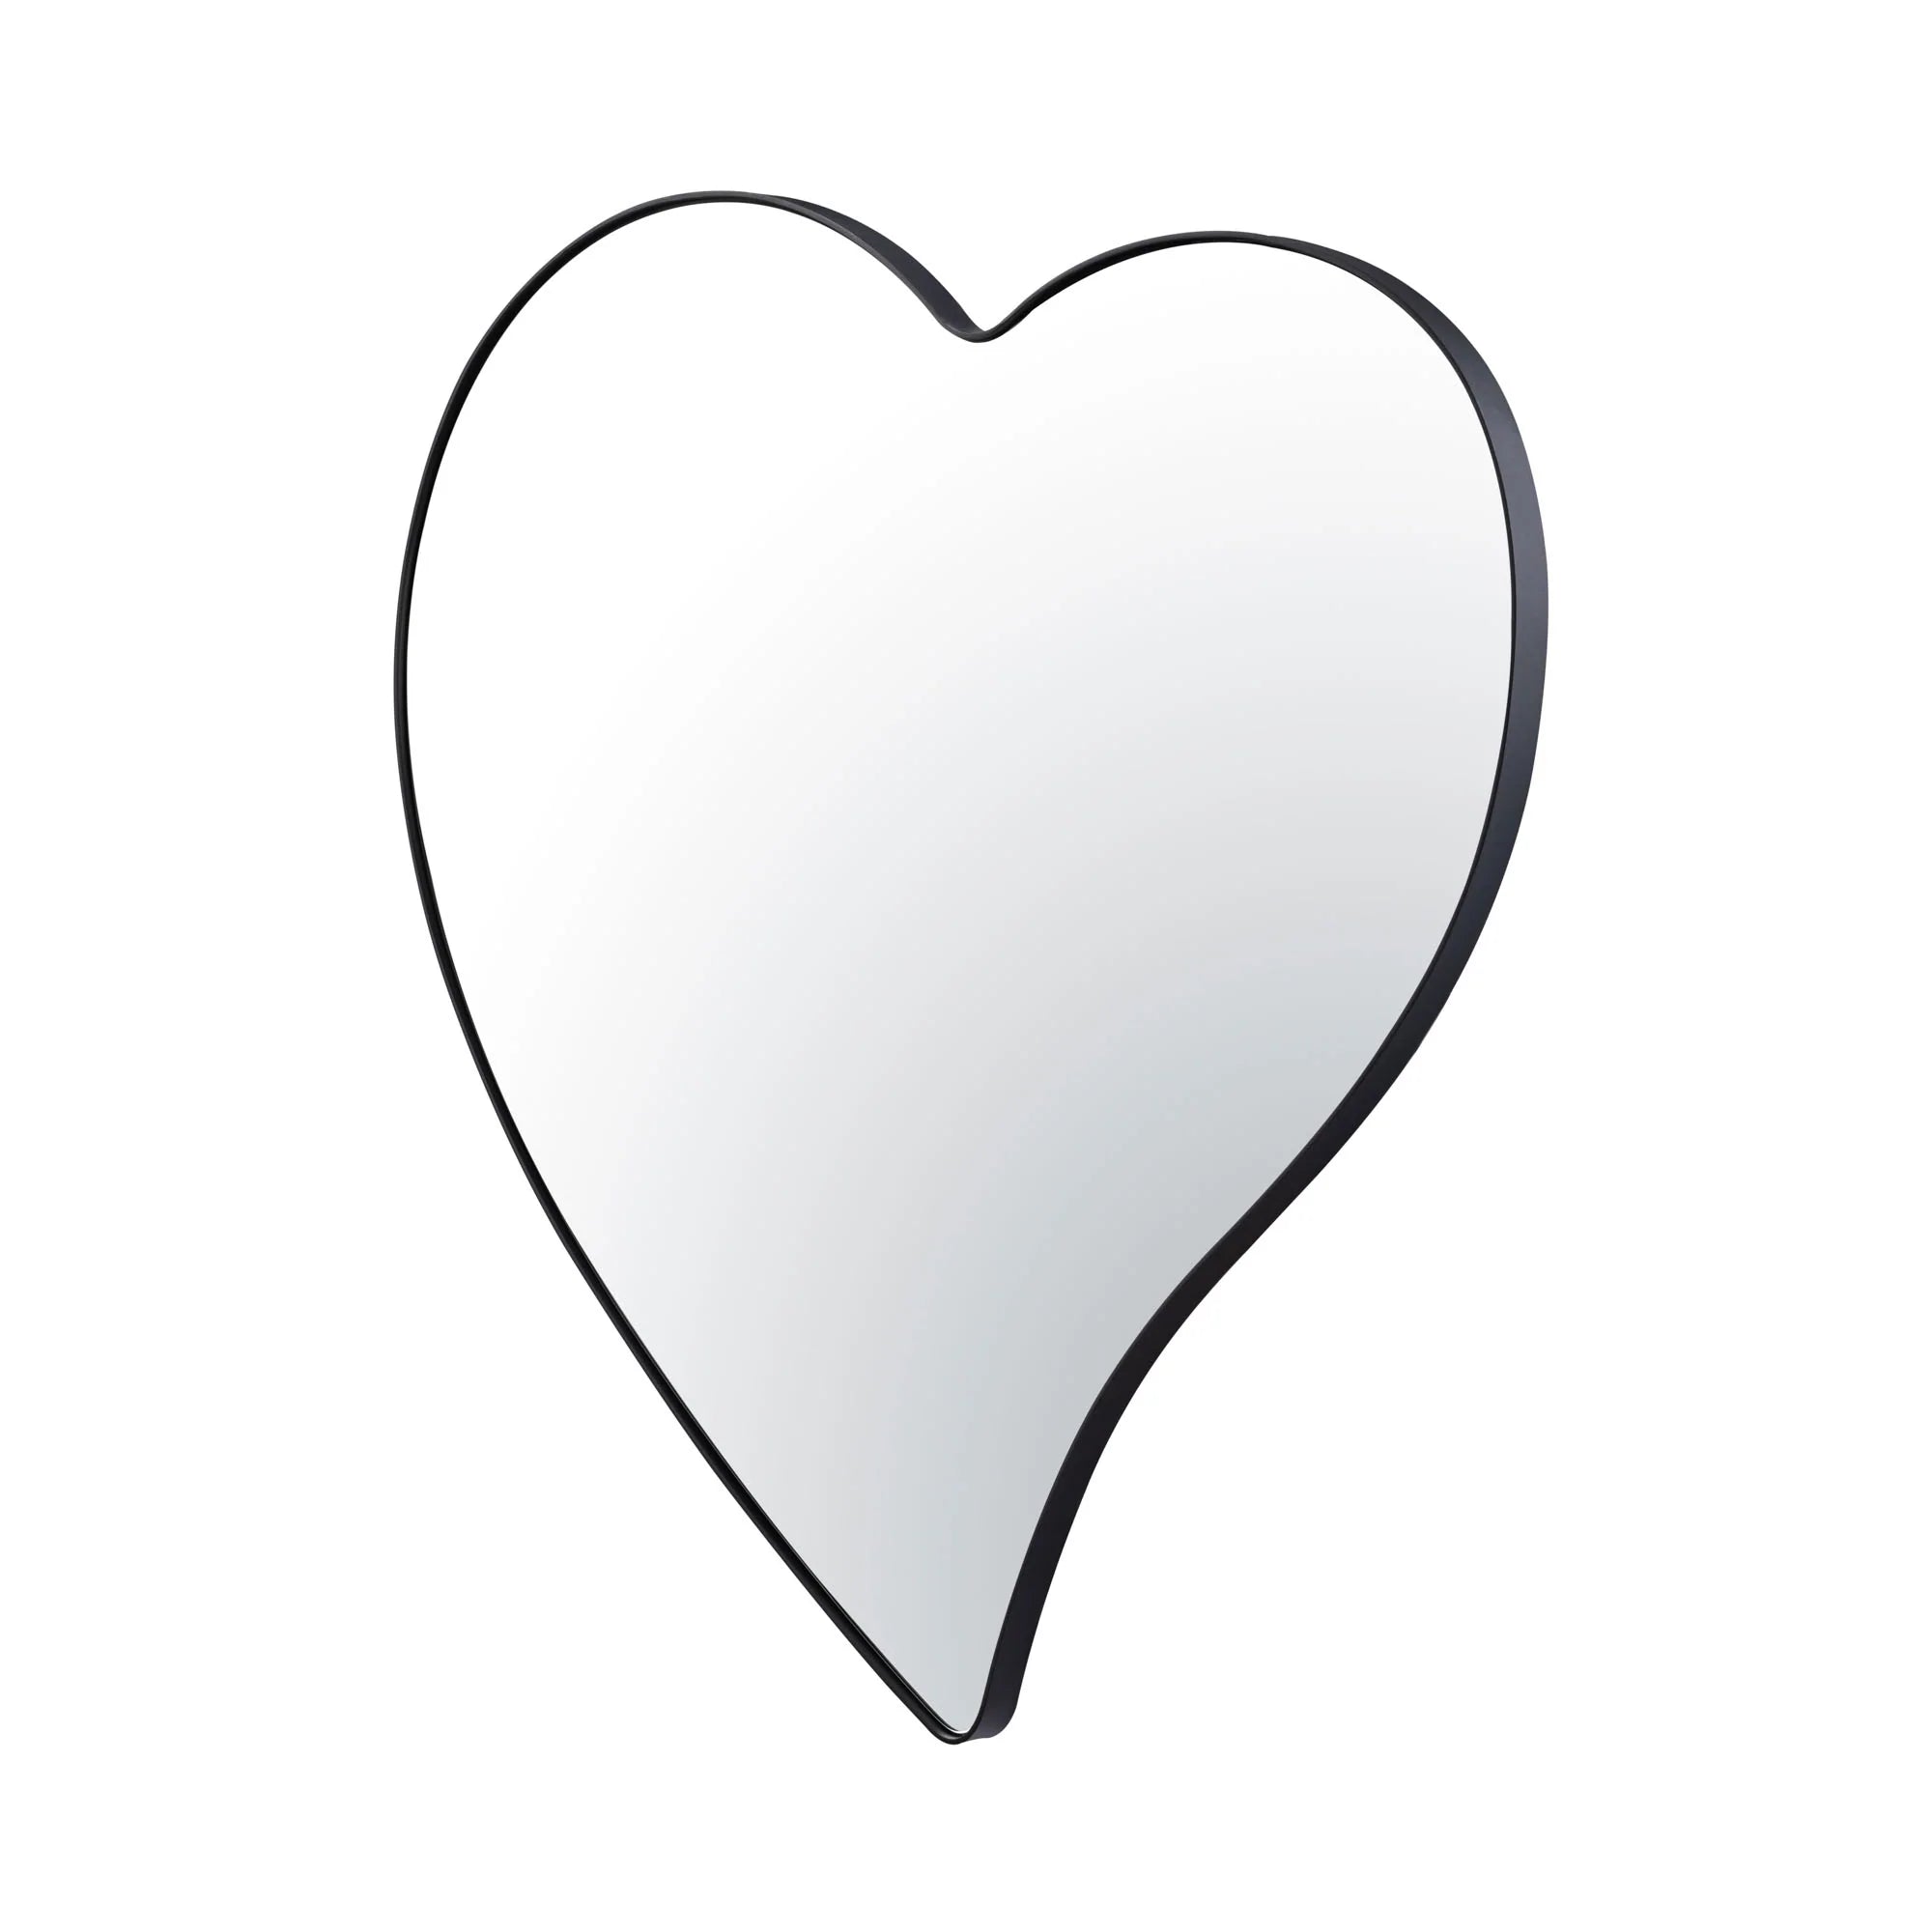 lampshade clipart black and white hearts